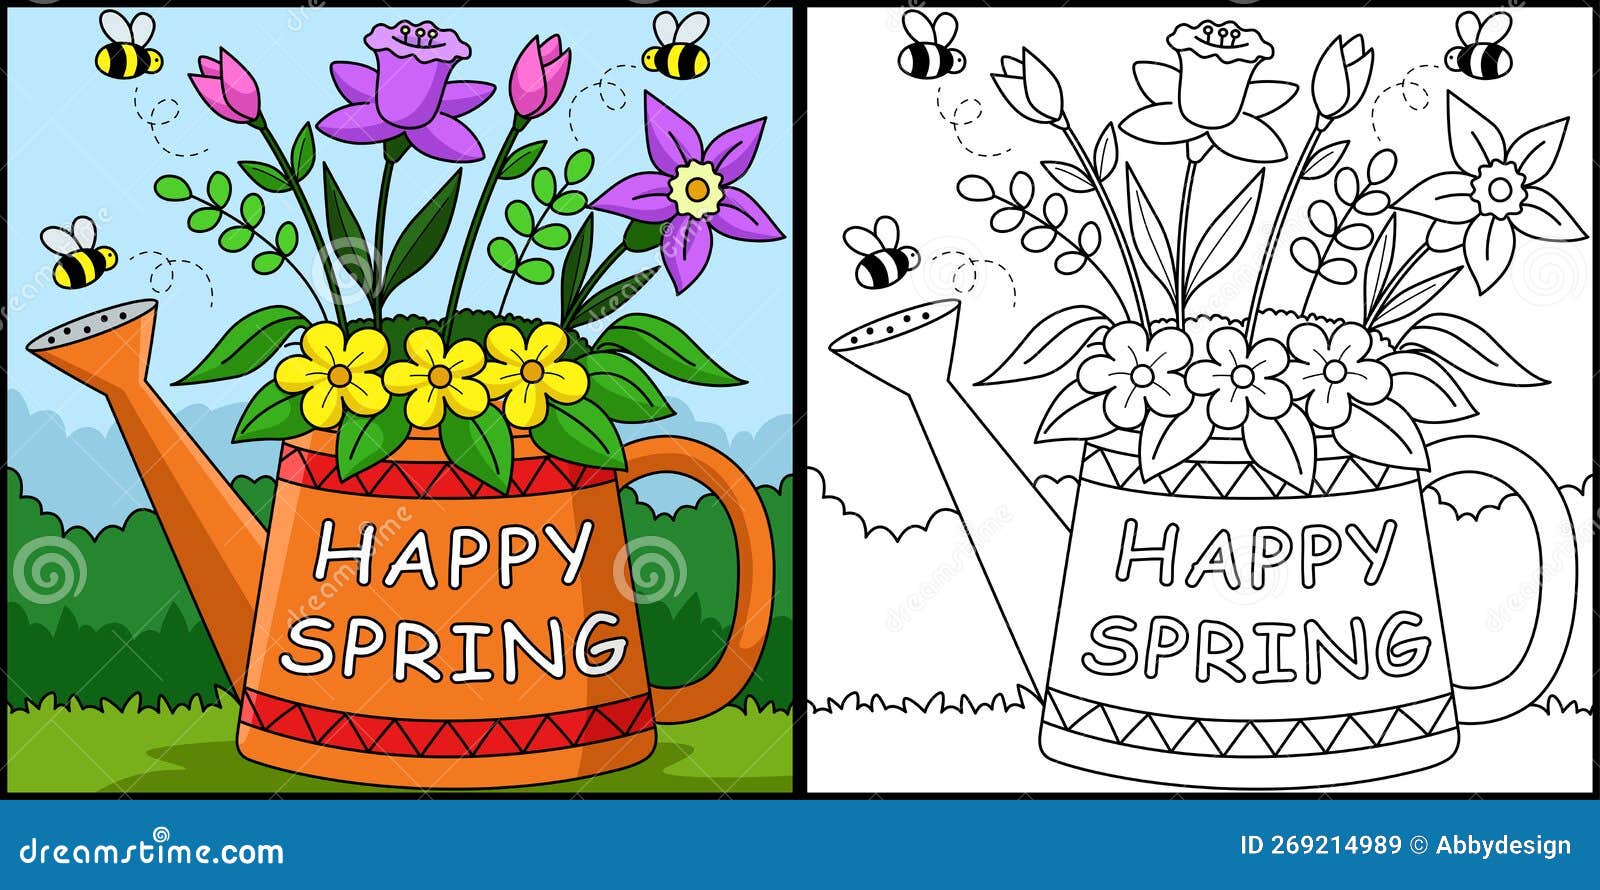 Happy spring flower coloring page illustration stock vector